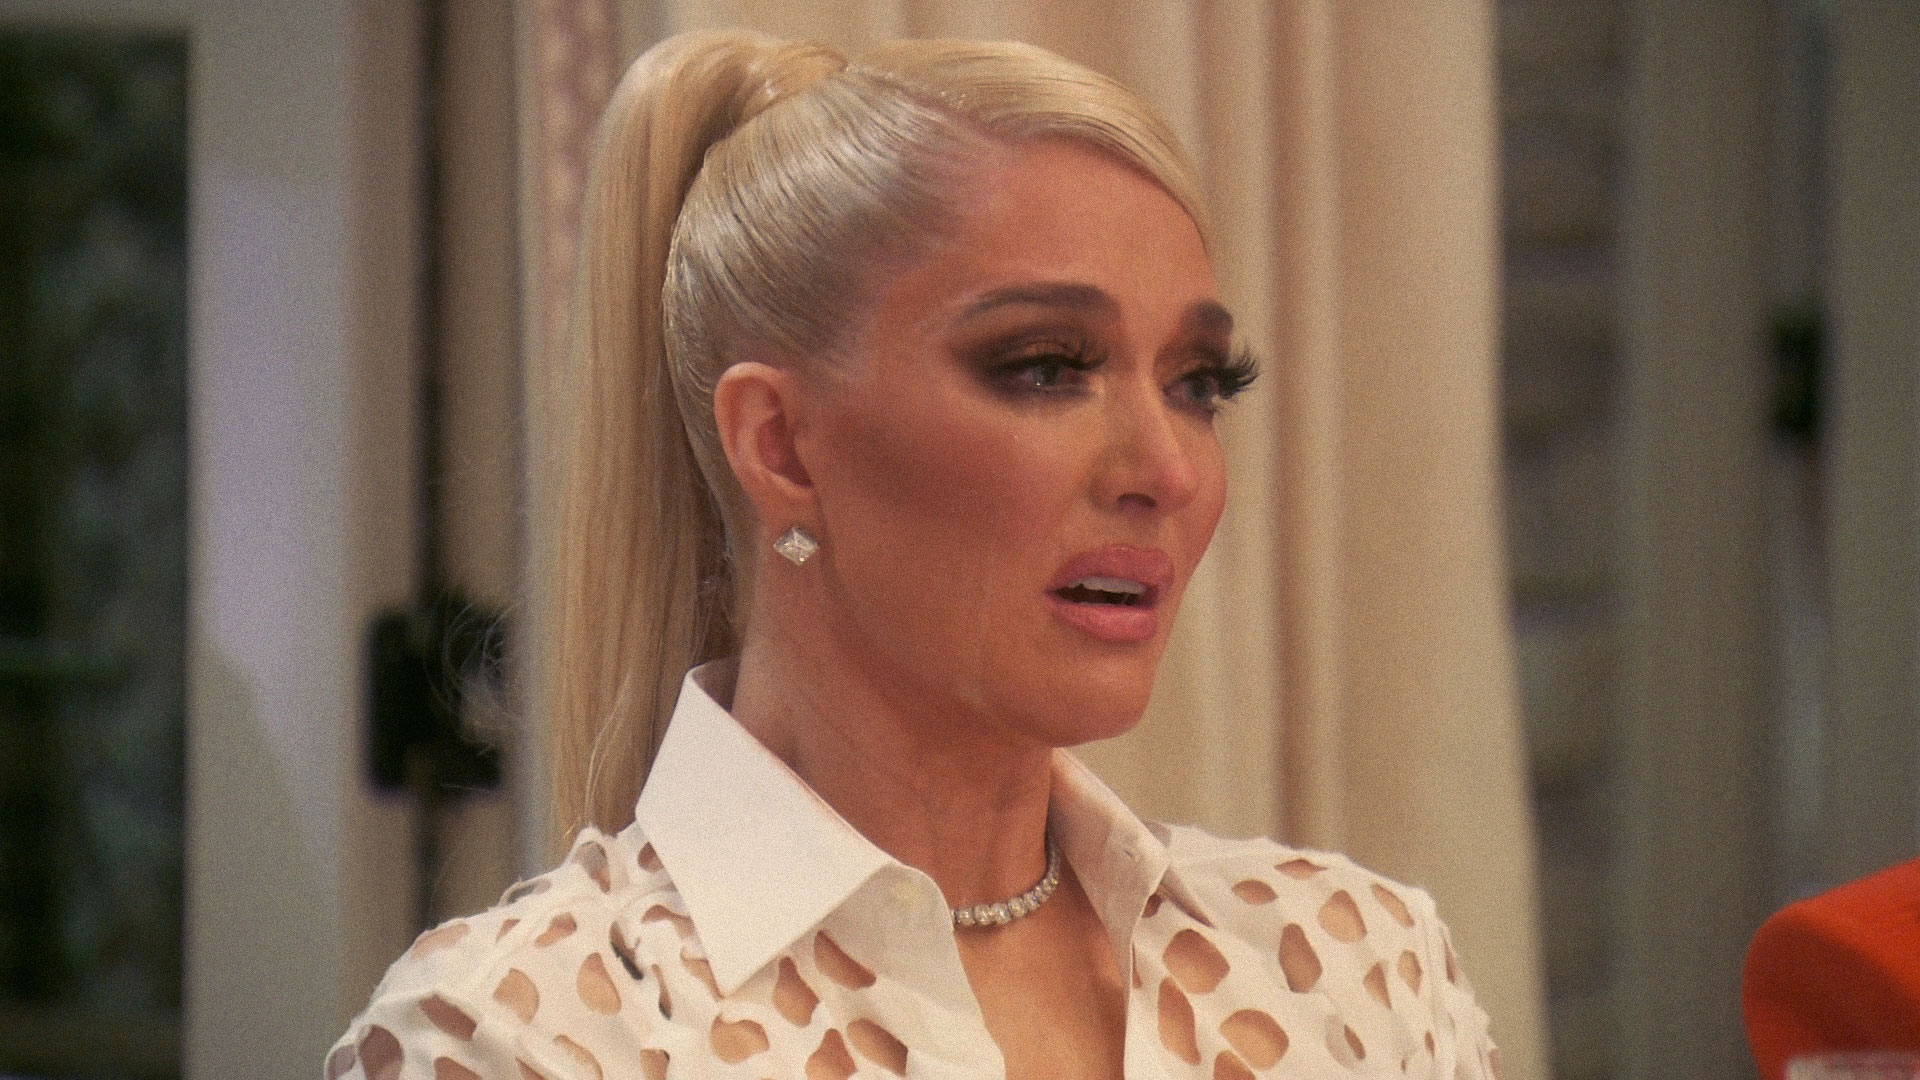 RHOBH The Real Housewives of Beverly Hills S11E15 saison 11 épisode 15 The Dinner Party from Hell: Part Two